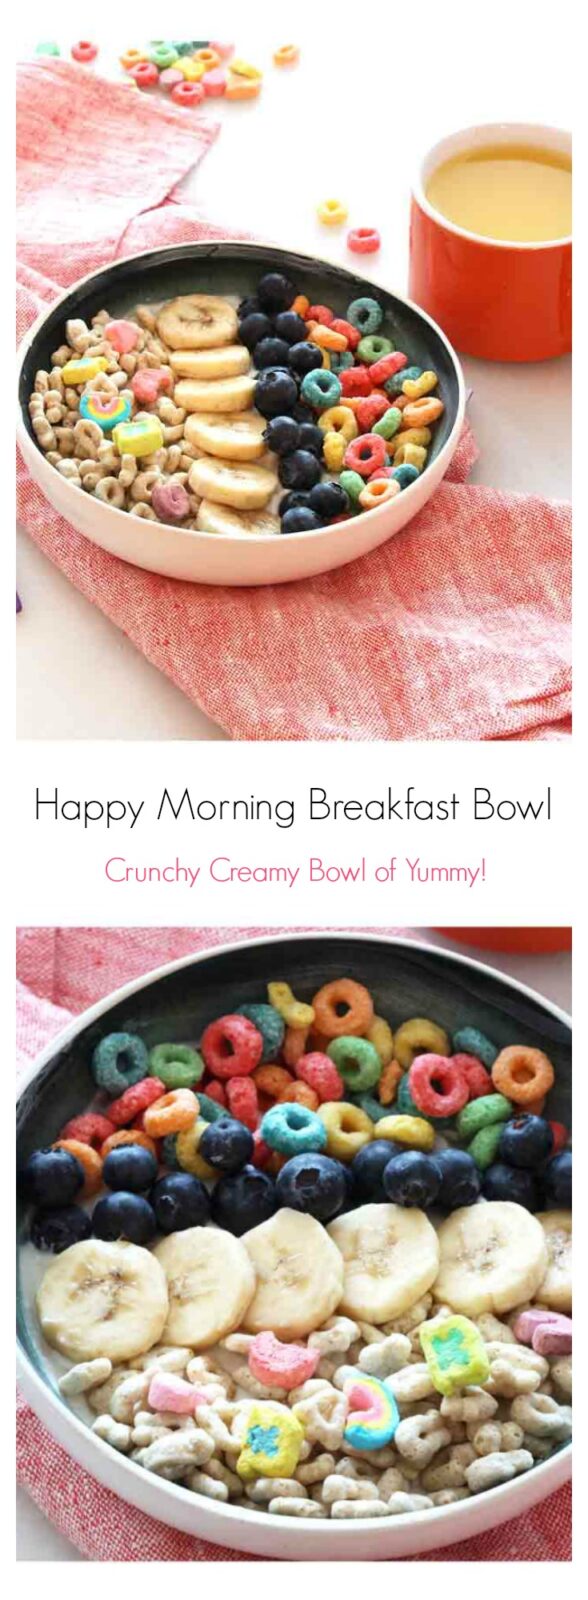 Breakfast is the most important meal of the day, so it shouldn't be boring. Quick is key, and this speedy recipe provides a crunchy, creamy, colorful bowl. ChopHappy.com